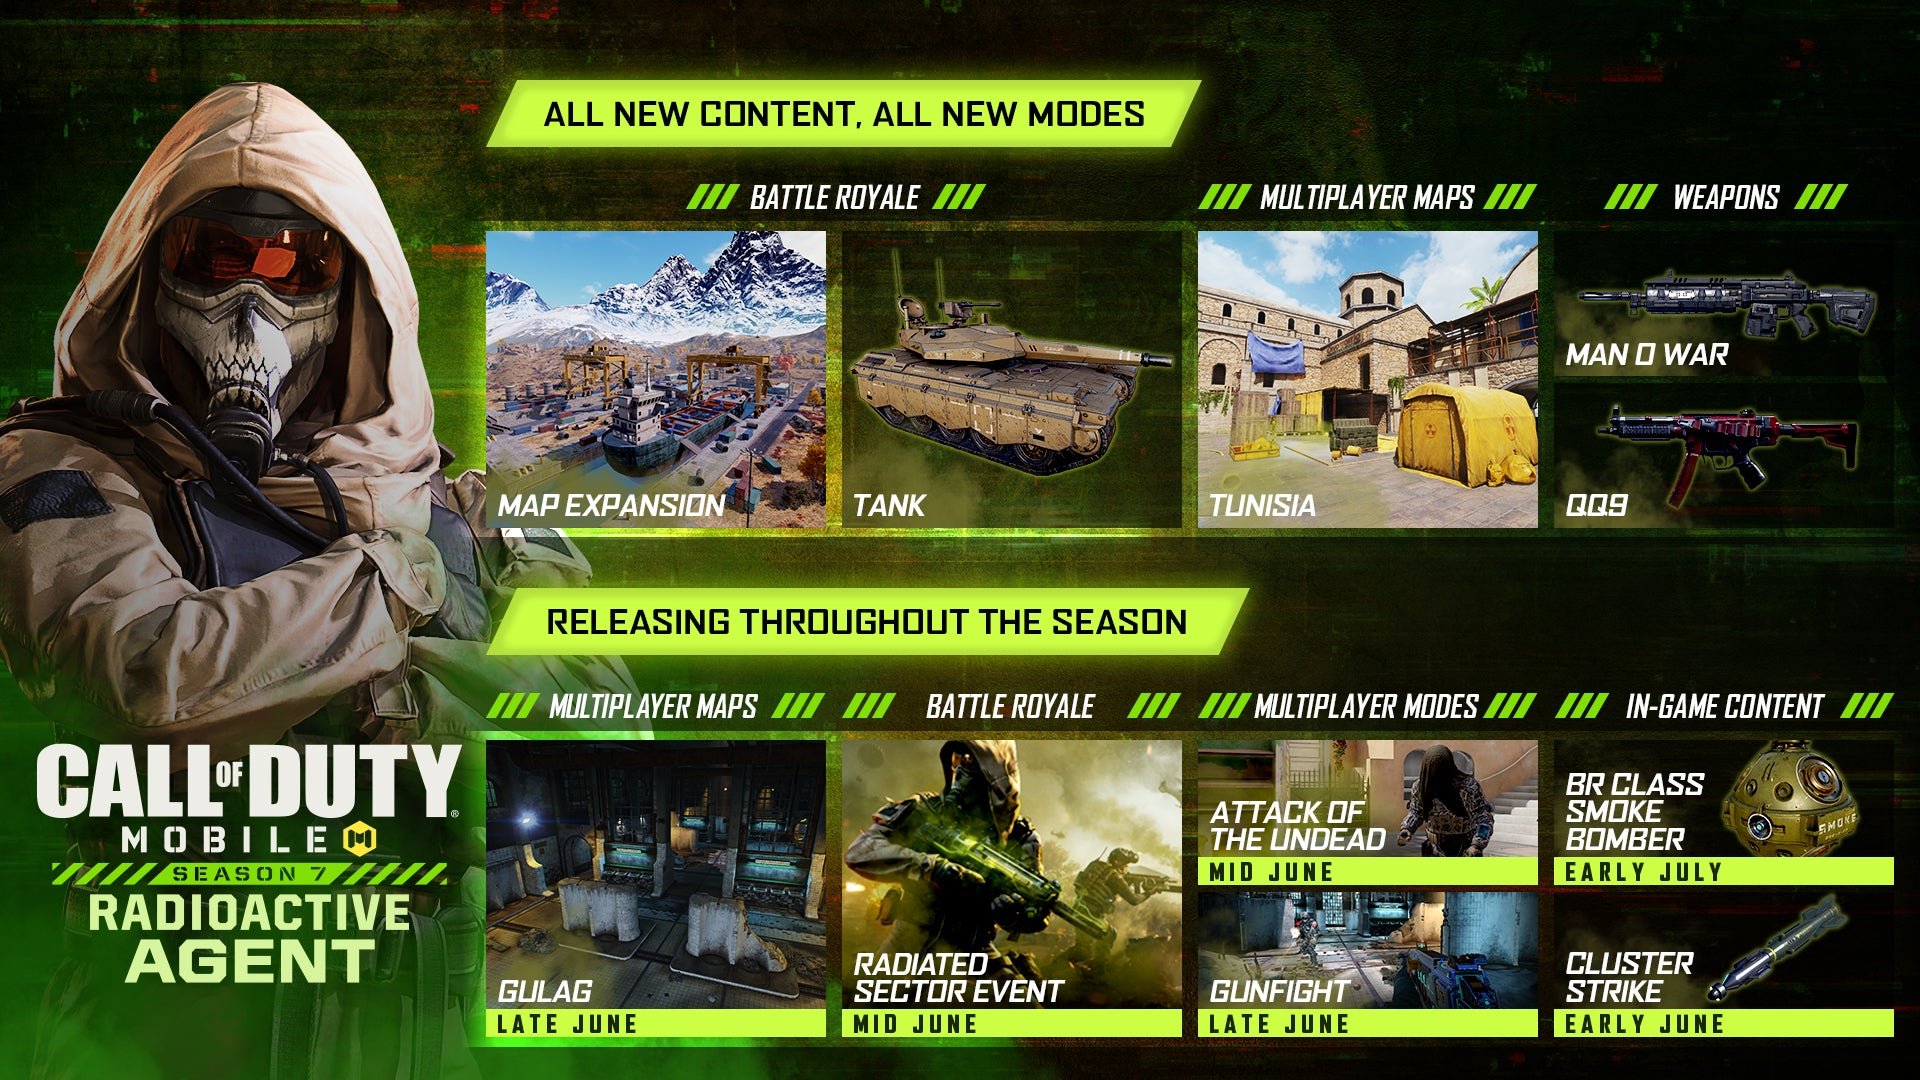 More Details About Call of Duty Mobile Emerge As Beta Launches in More  Regions